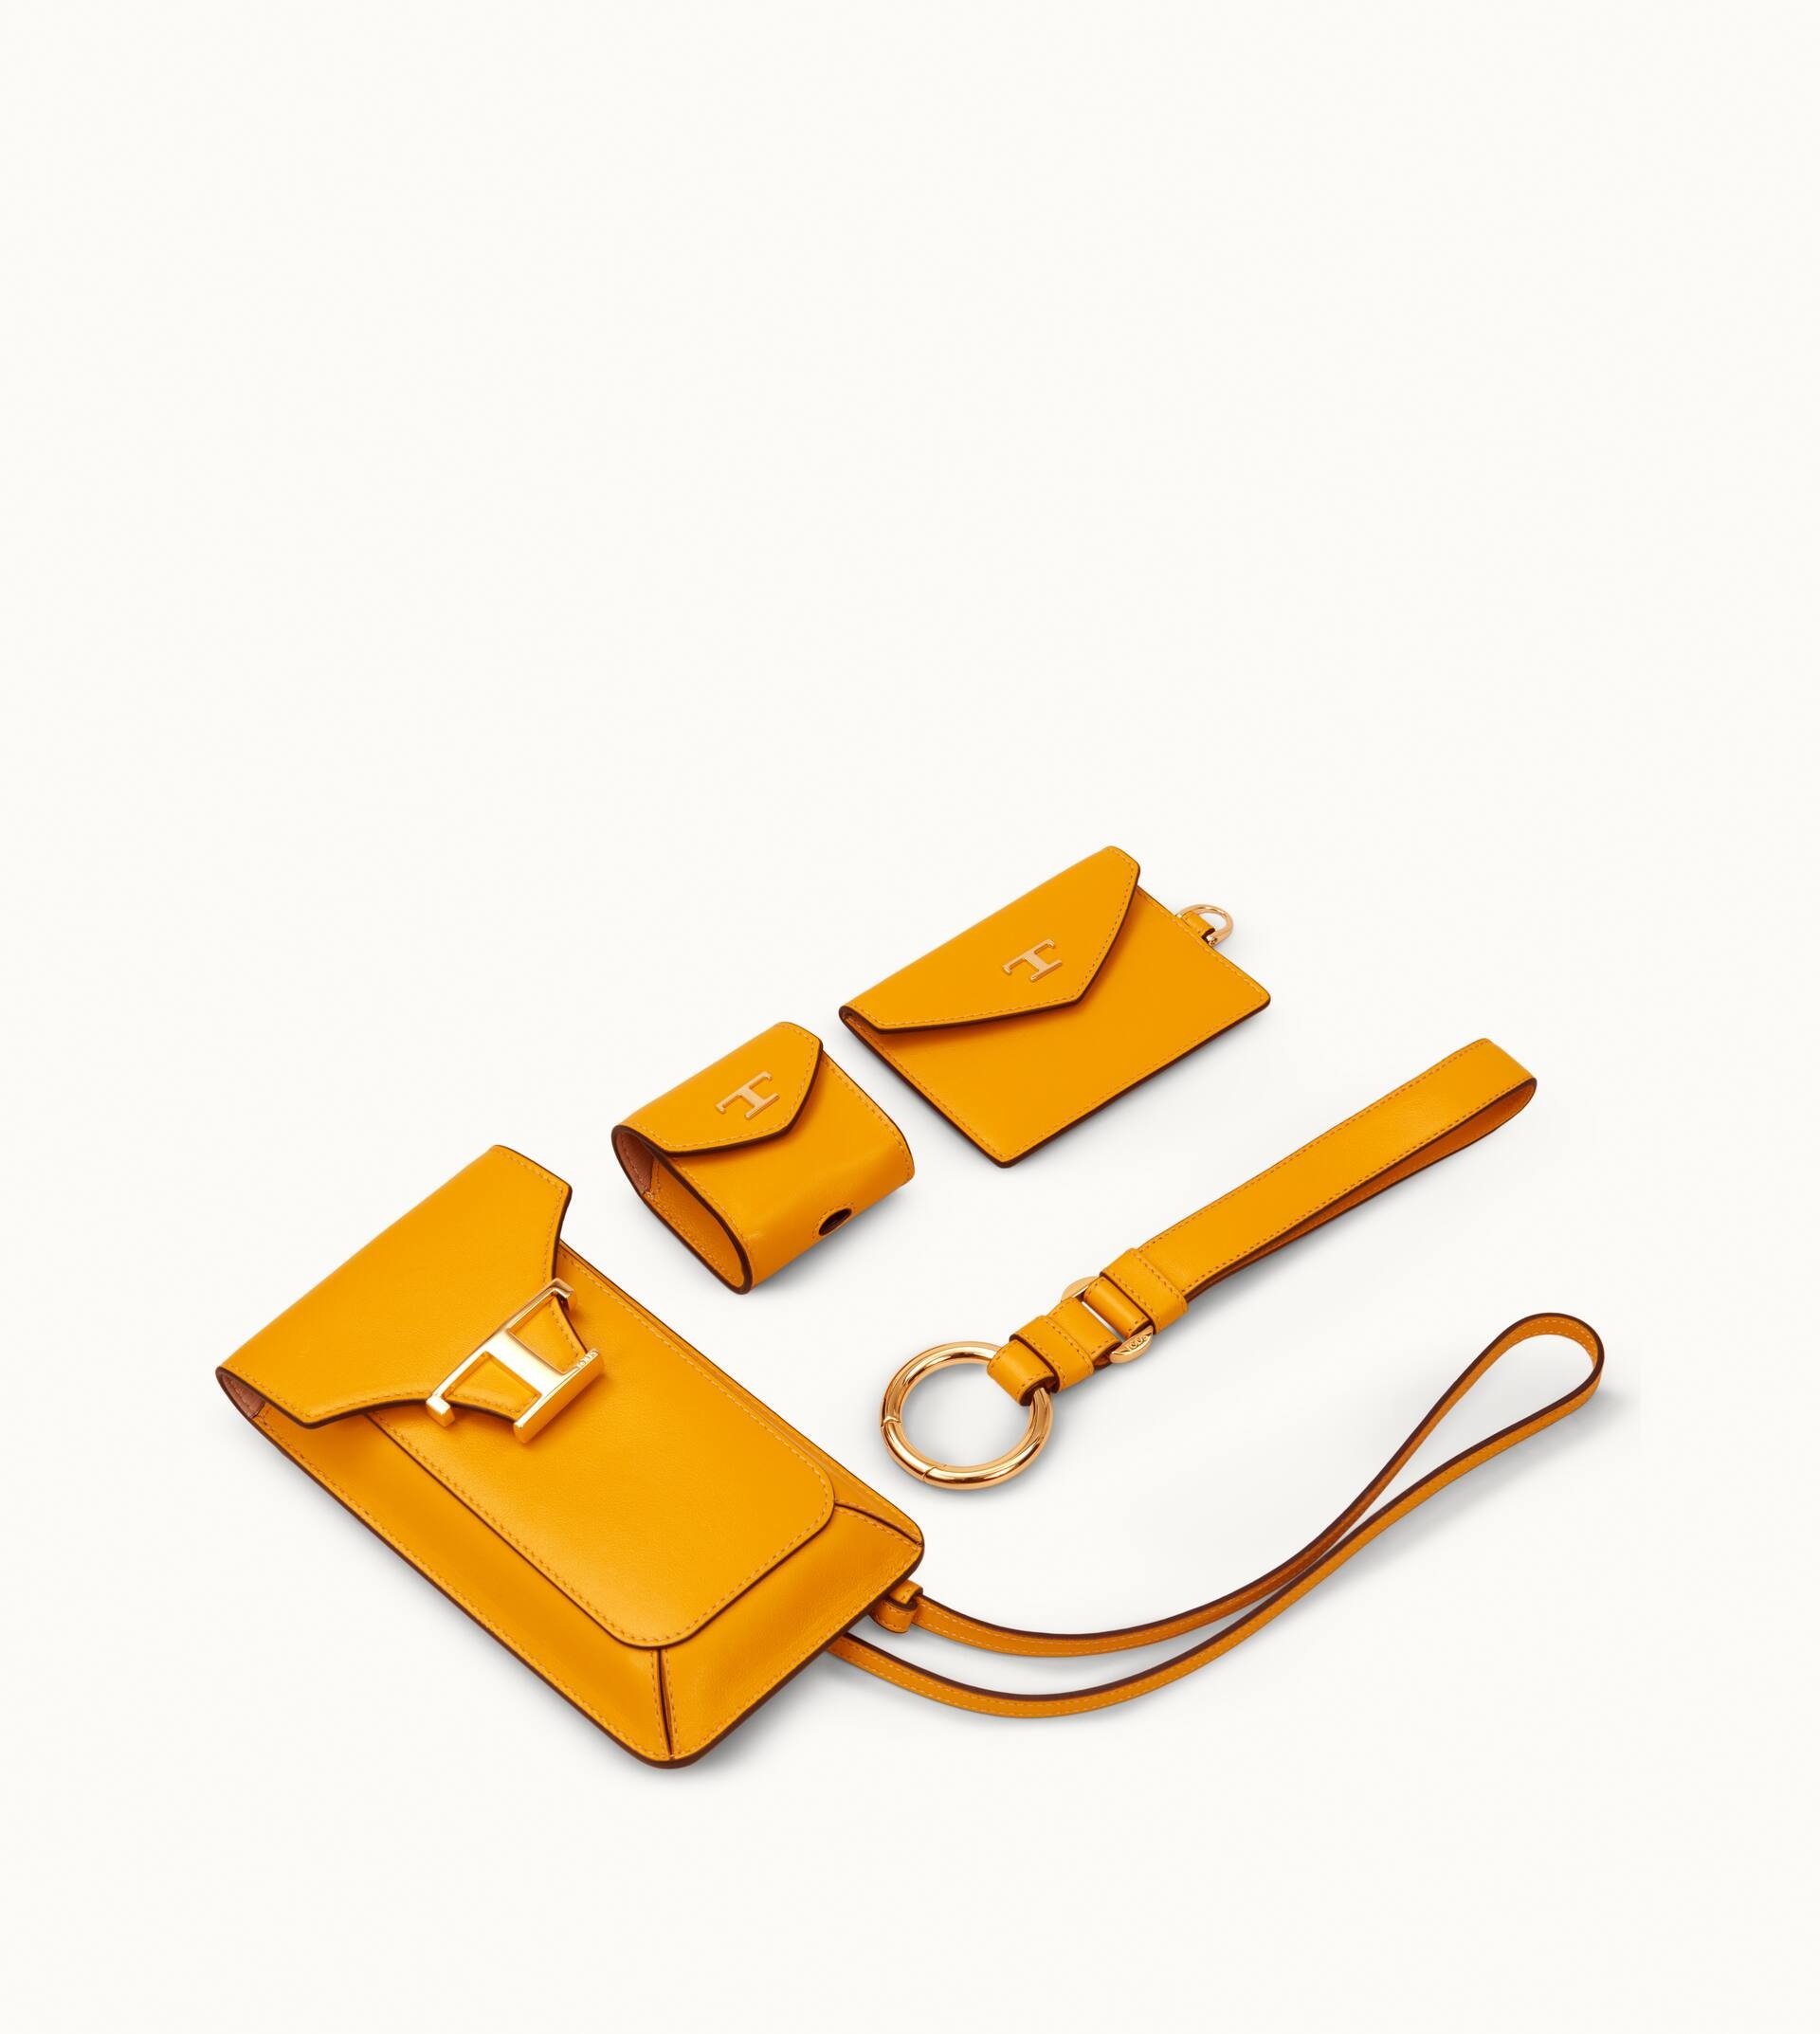 IPHONE 3 IN 1 HOLDER - YELLOW - 3